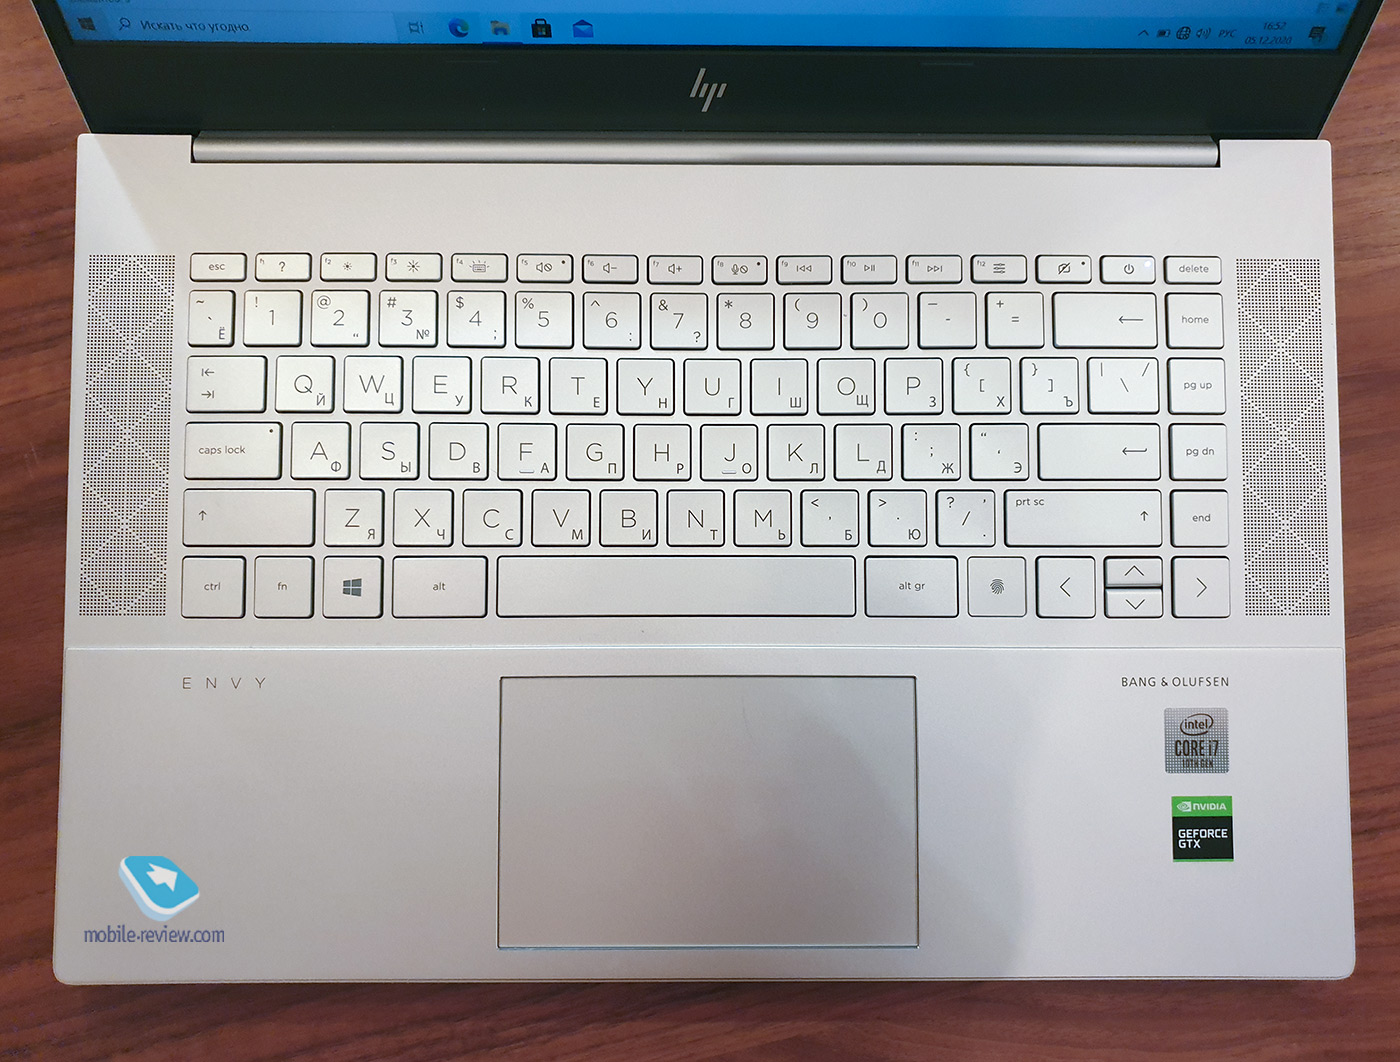 HP ENVY 15 review: a near-perfect all-round laptop